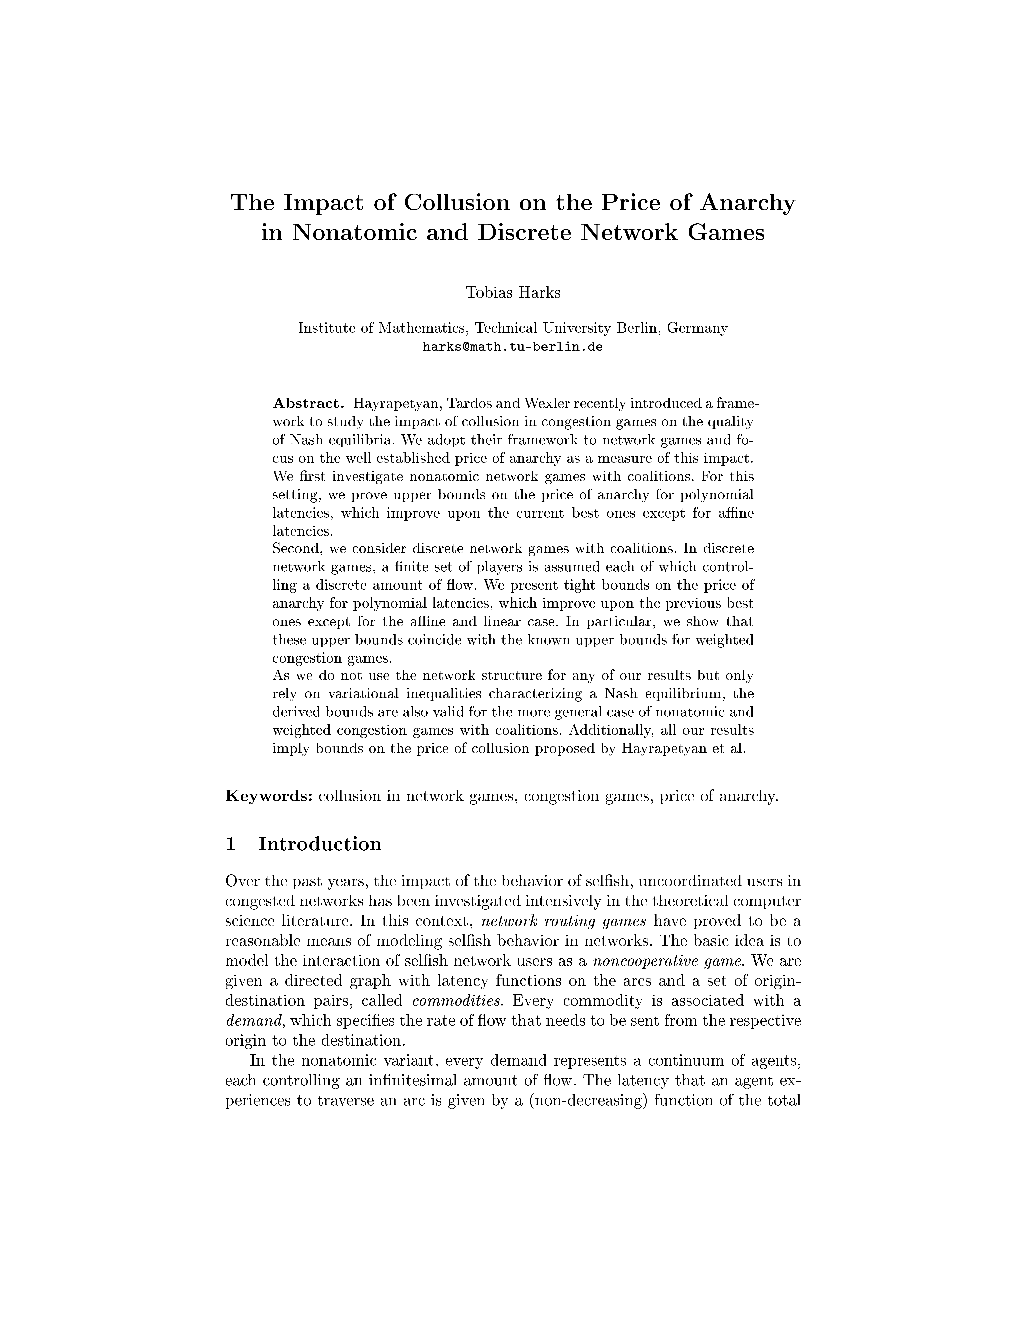 The Impact of Collusion on the Price of Anarchy in Nonatomic and Discrete Network Games